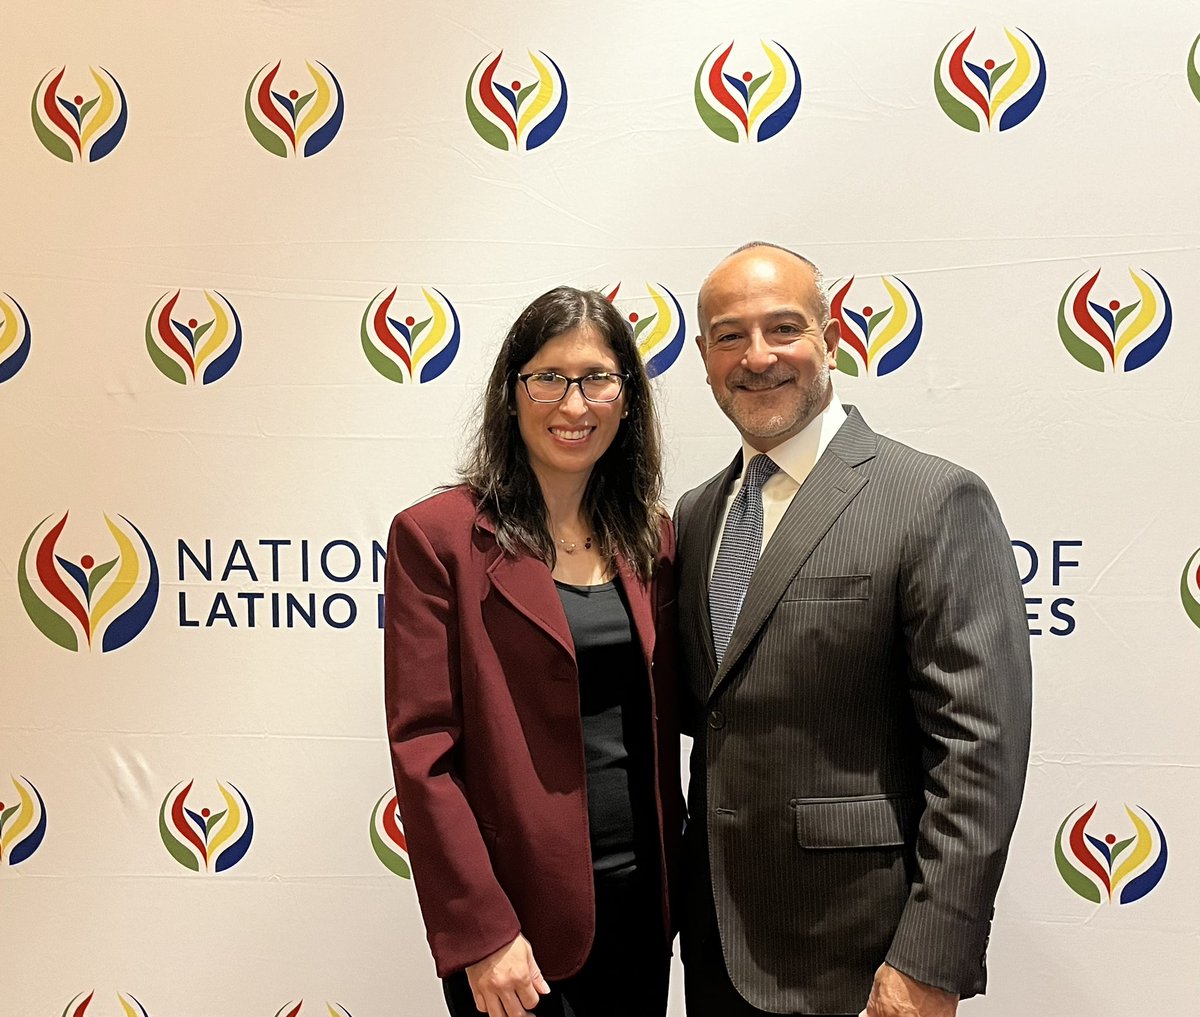 Thank you National Association of Latino Healthcare Executives @NALHEUSA and Dr. Veronica Sandoval for a wonderful and meaningful conversation at the Annual Meeting this week. Thankful and grateful. @commonwealthfnd